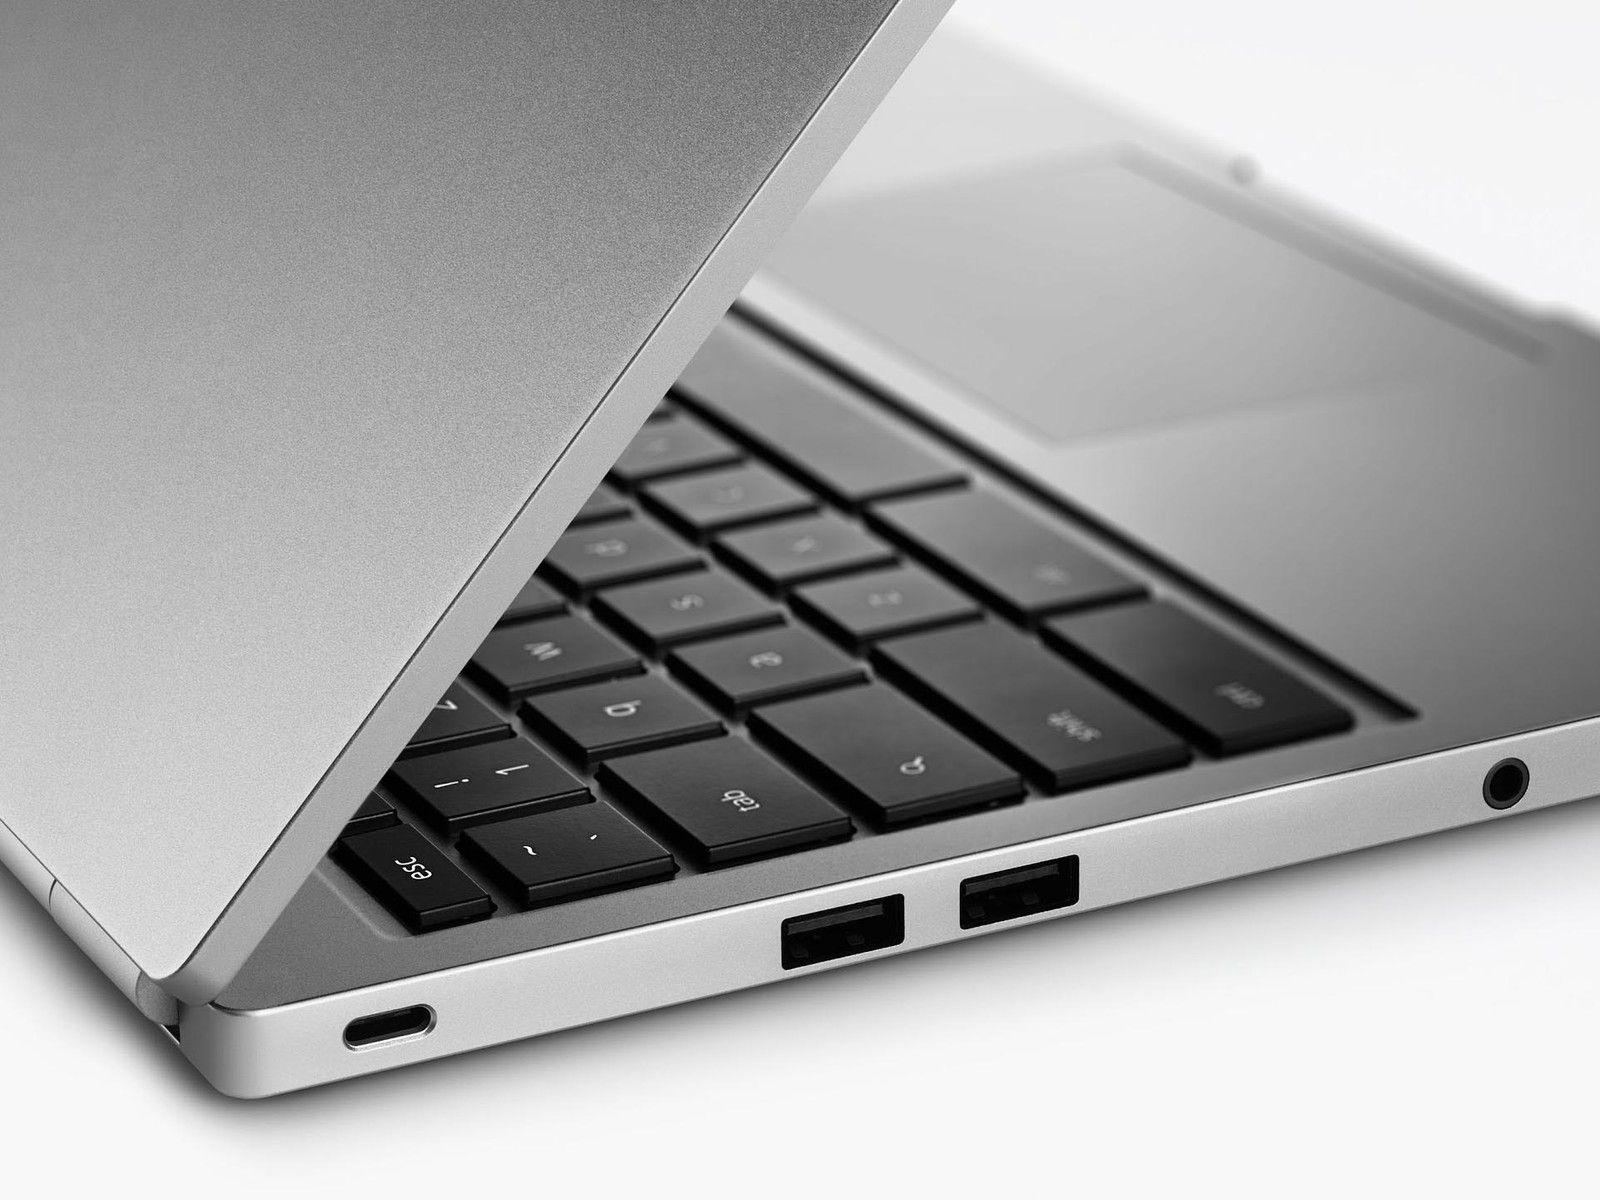 Chromebook Pixel Logo - Google is no longer selling its $999 2015 Chromebook Pixel. Android